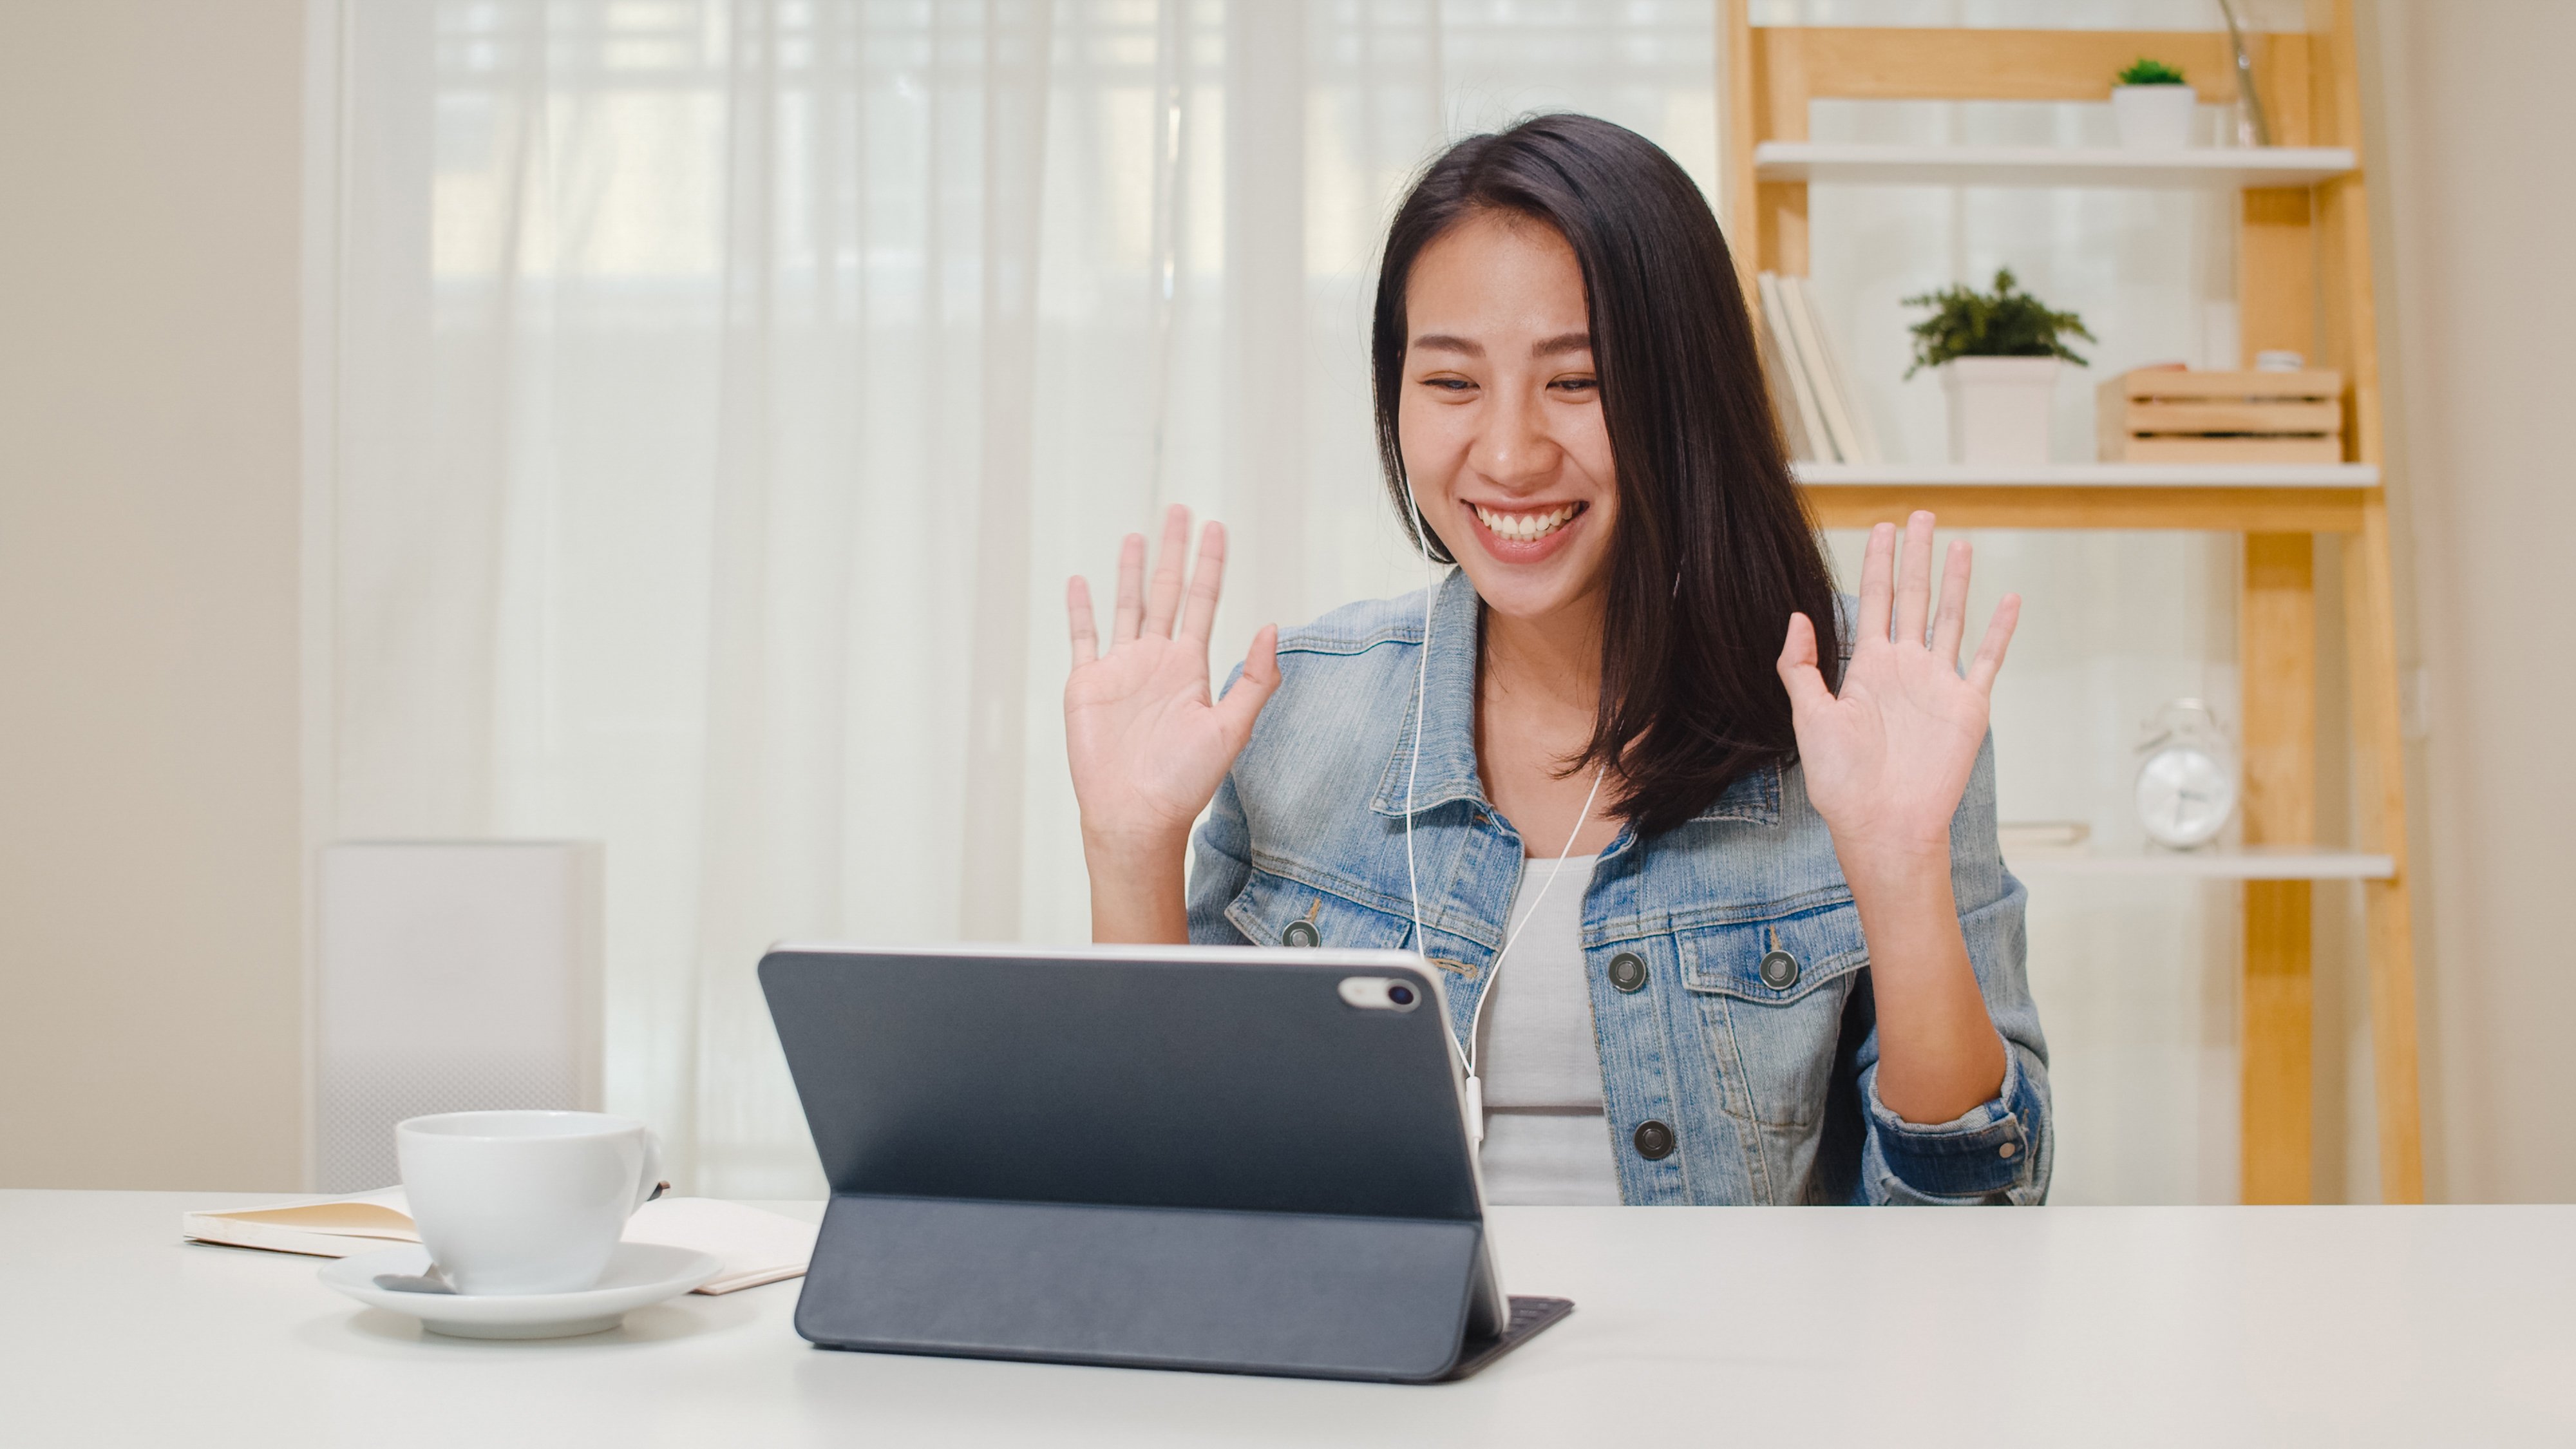 freelance-business-women-casual-wear-using-tablet-working-call-video-conference-with-customer-workplace-living-room-home-happy-young-asian-girl-relax-sitting-desk-job-internet-1